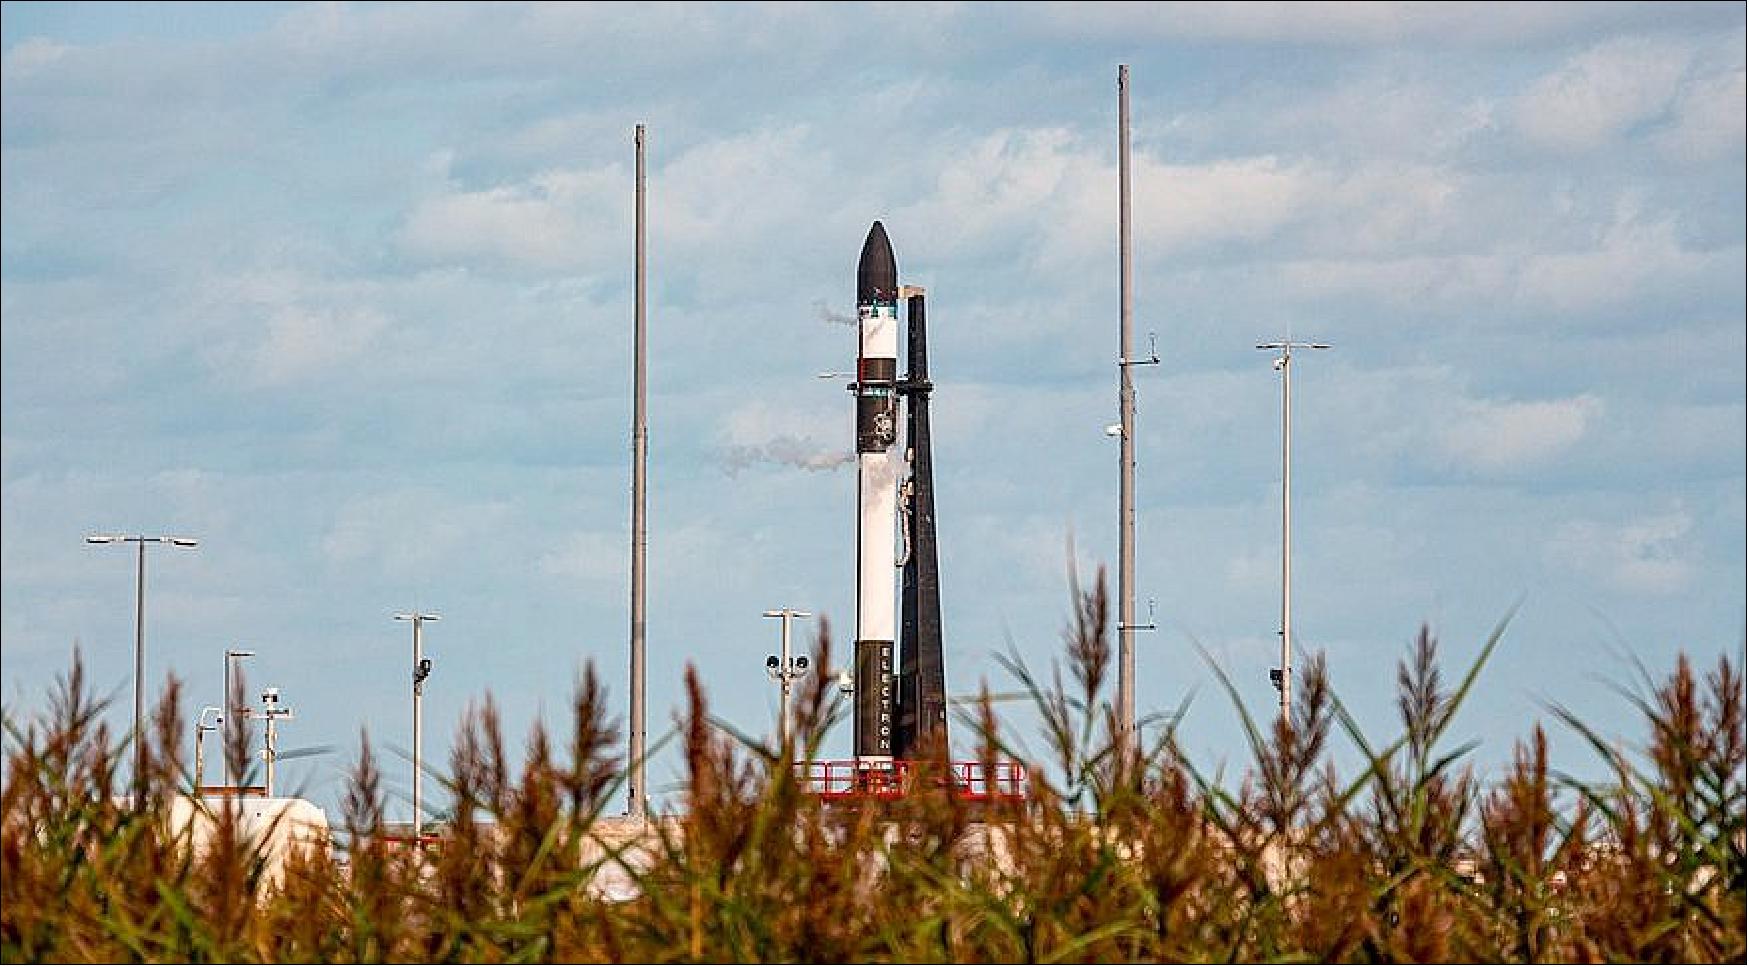 Figure 4: A Rocket Lab Electron during tests earlier this year at its LC-2 launch site at Wallops Island, Virginia. The rocket's first launch is now scheduled for no earlier than the first half of 2021 (image credit: Rocket Lab)